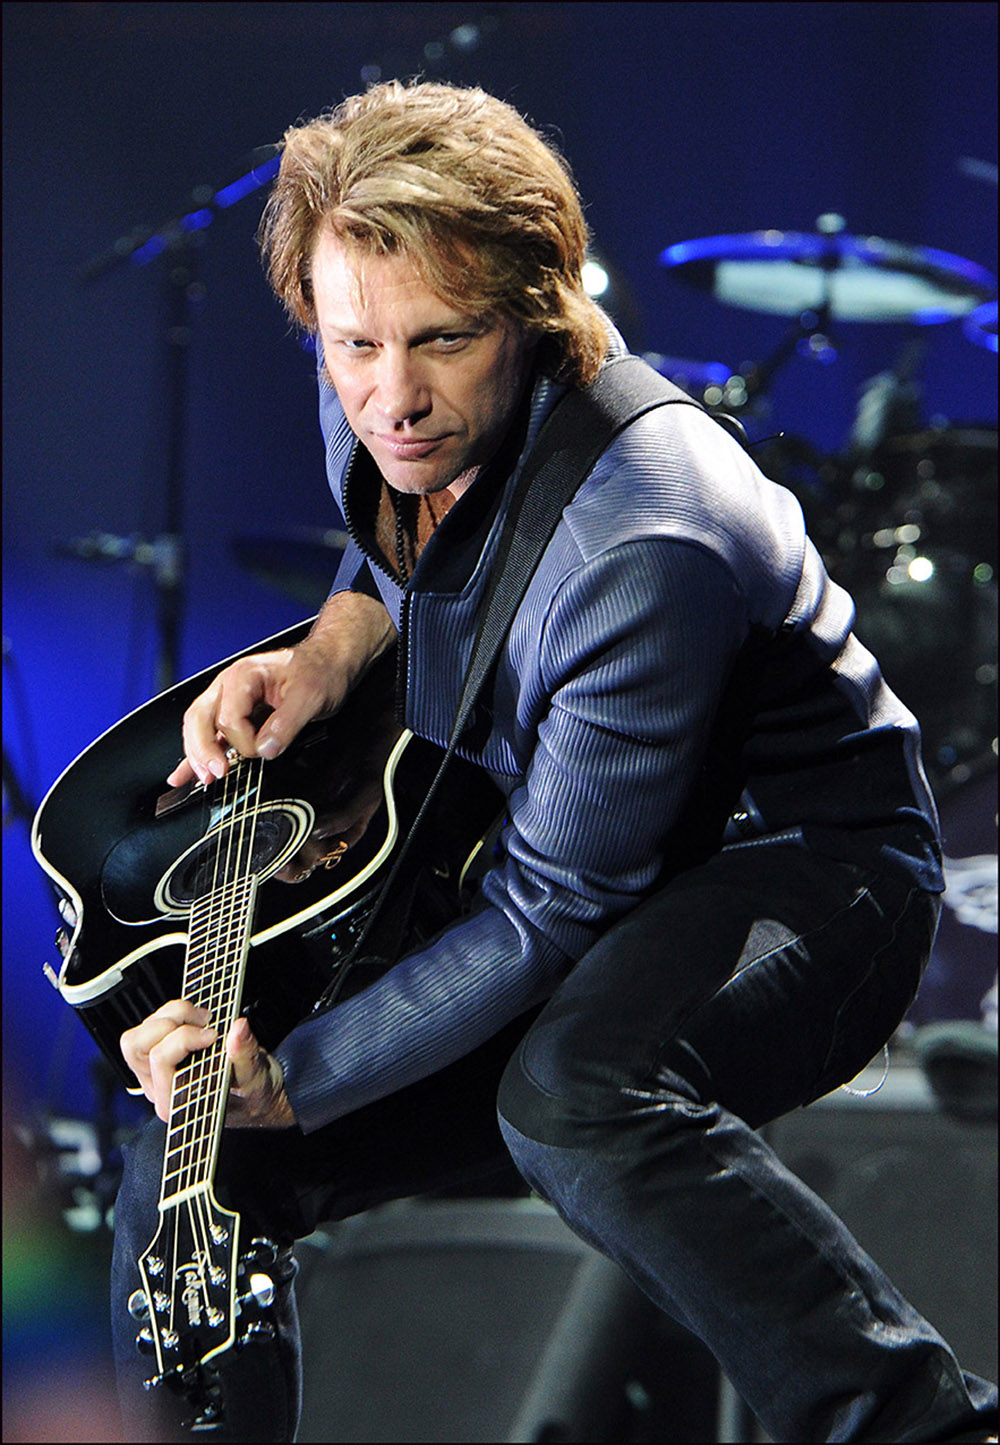 Jon Bon Jovi performs as his band continue their series of concerts throughout June at London’s O2 Arena, 17 June 2010